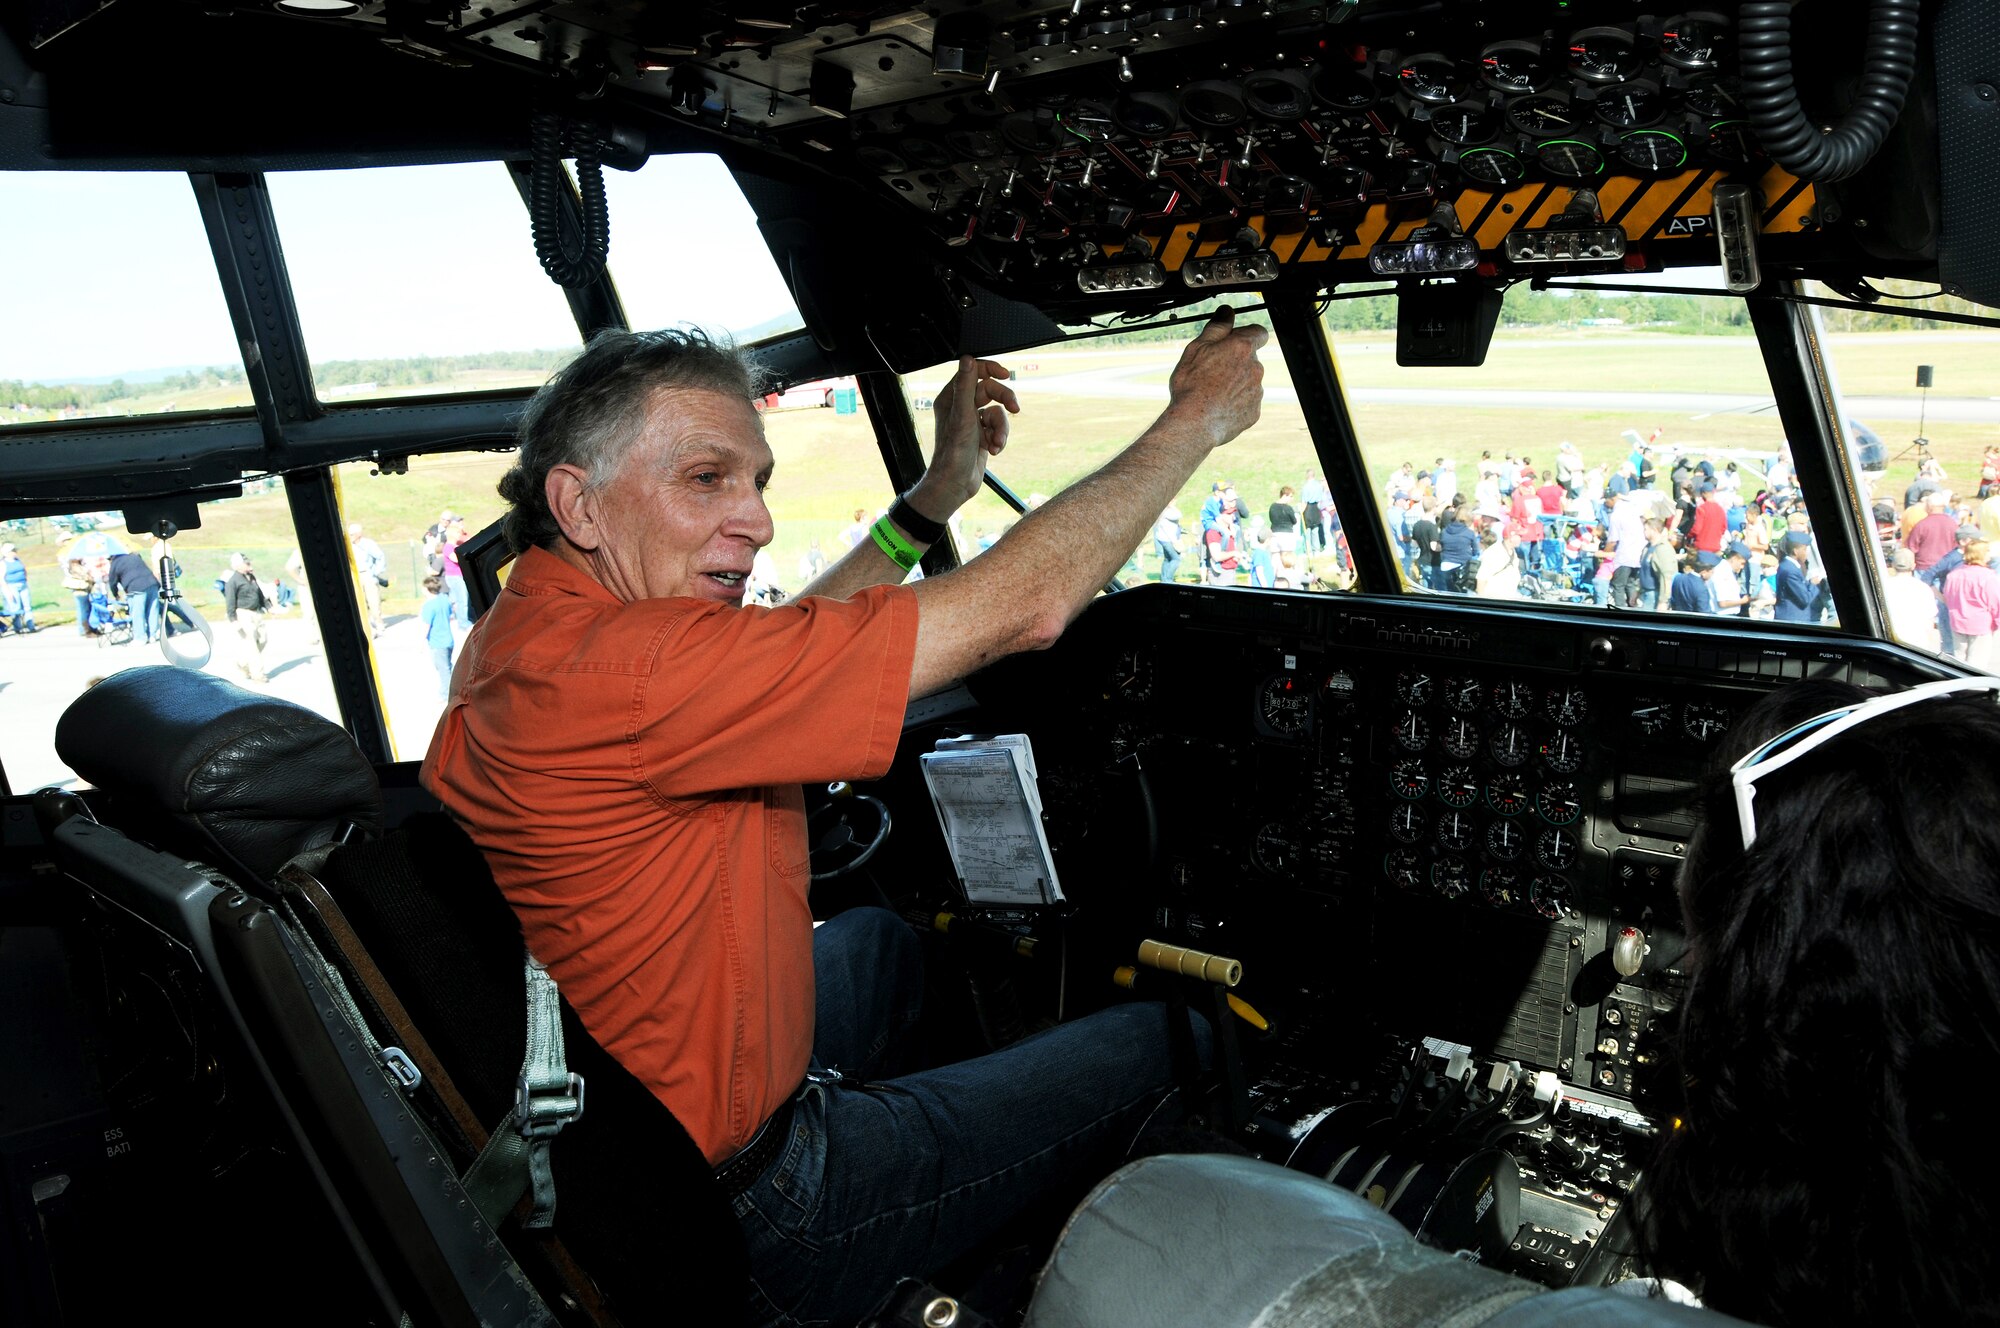 Brian Shuler, a Marietta, Ga. resident and former C-130 crew member, demonstrates differences between the one he flew in and the static from Dobbins Air Reserve Base at the Wings over North Georgia air show in Rome, Ga, Oct. 18, 2014. The 700th Airlift Squadron brought a U.S. Air Force C-130 Hercules to the WONG air show as a static display. (U.S. Air Force photo by Senior Airman Daniel Phelps/Released)